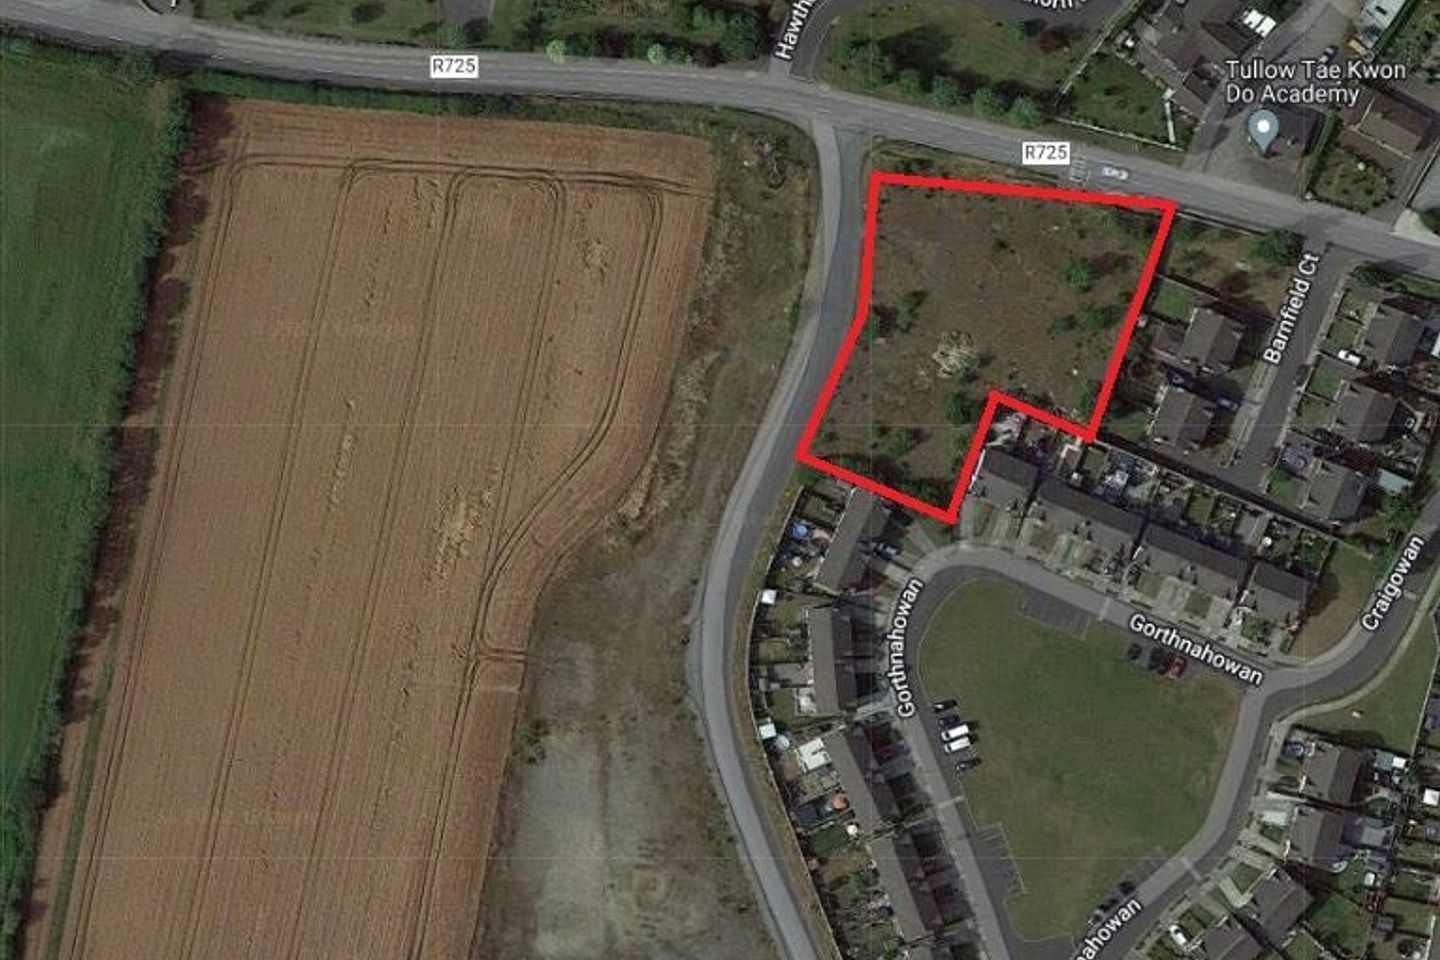 0.8 Acres, Residential Development Site, Carlow Road, Tullow, Co. Carlow